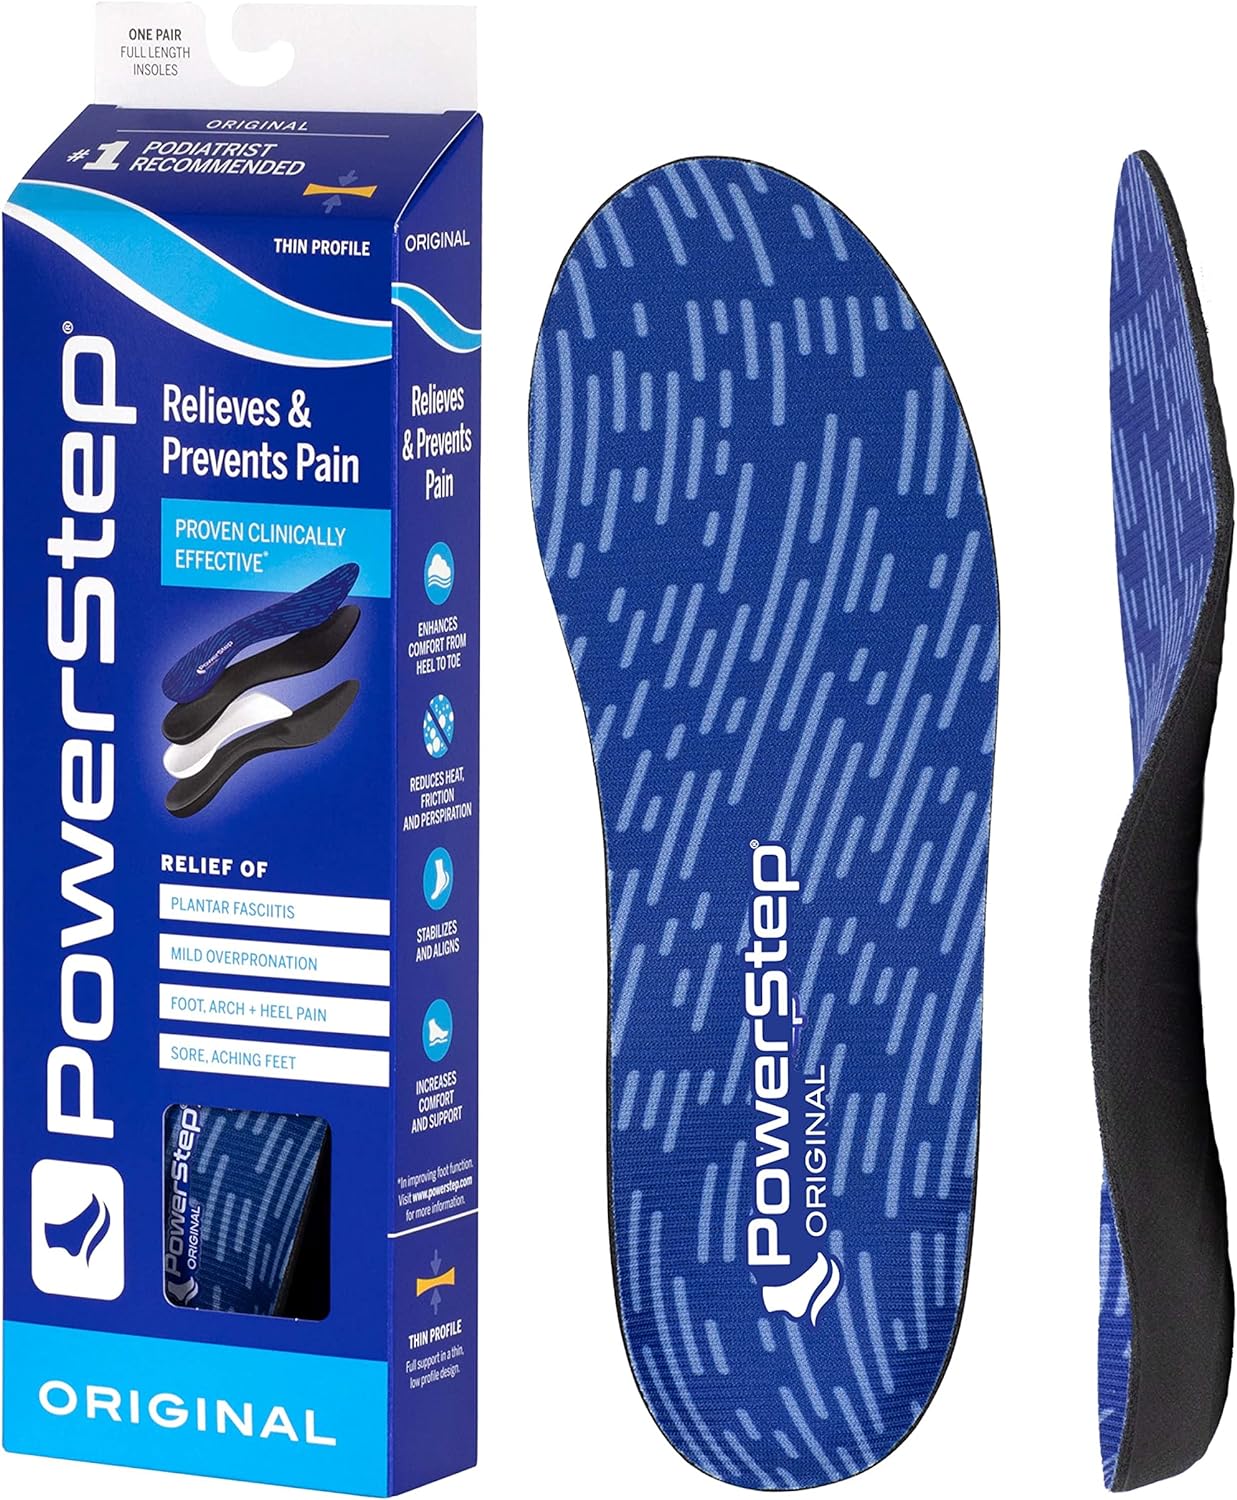 PowerStep Original Insoles - Arch Pain Relief Orthotics for Tight Shoes - Foot Support for Plantar Fasciitis, Mild Pronation and Foot  Arch Pain - Shoe Inserts for All (M 3-3.5 W 5-5.5)